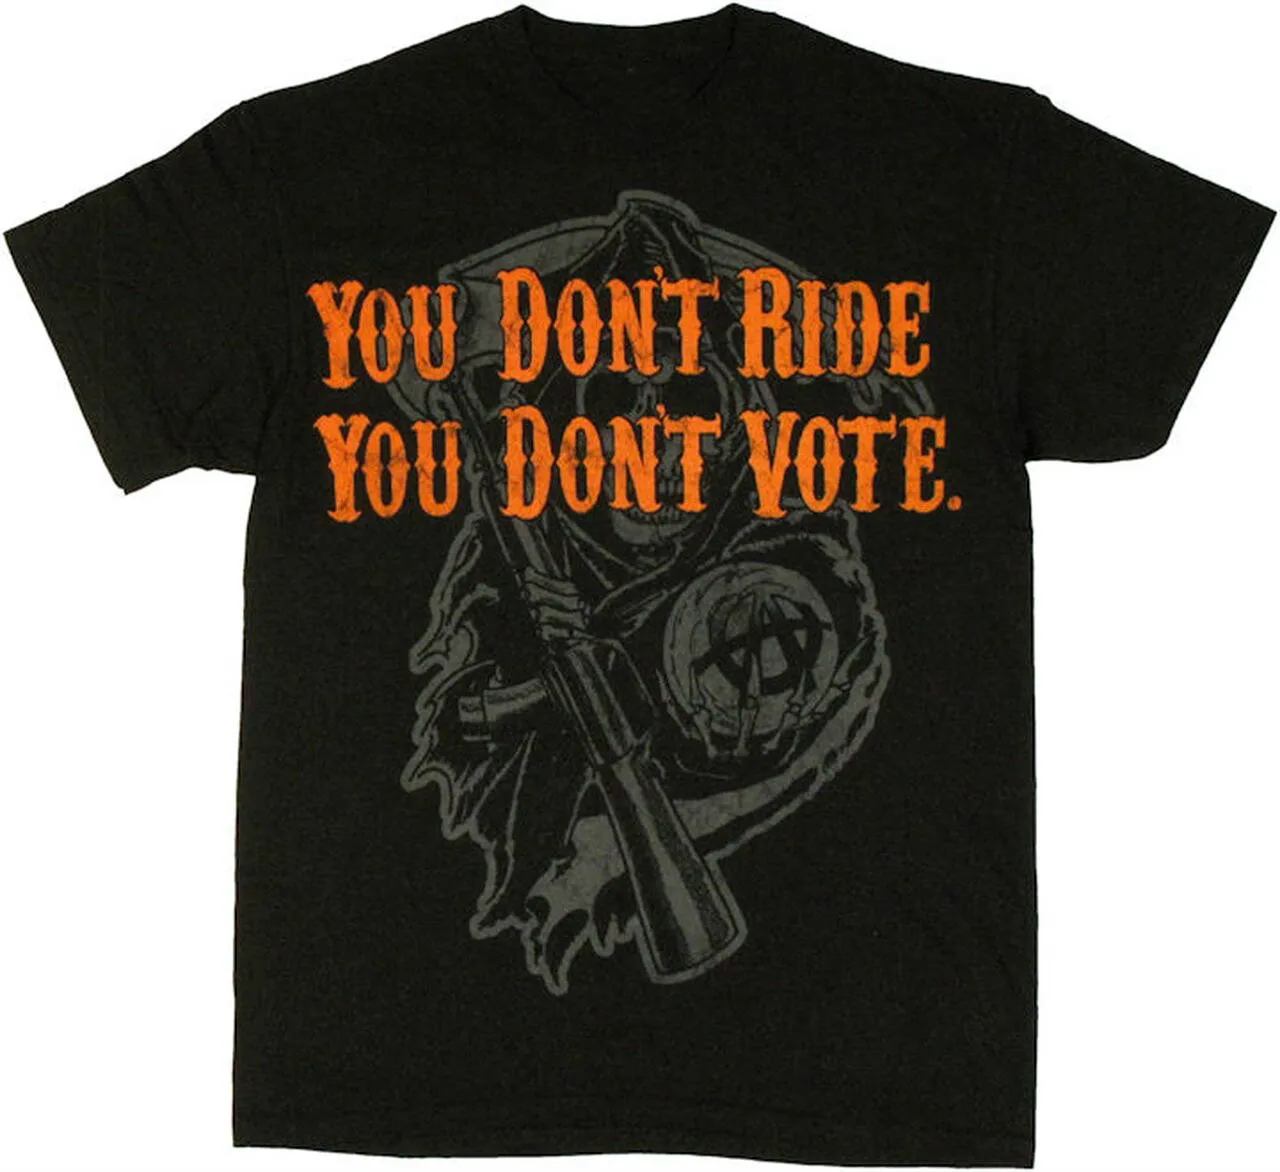 

Sons of Anarchy Don't Ride Vote Orange Printed Men's T-Shirt Summer Cotton Short Sleeve O-Neck Unisex T Shirt New S-3XL